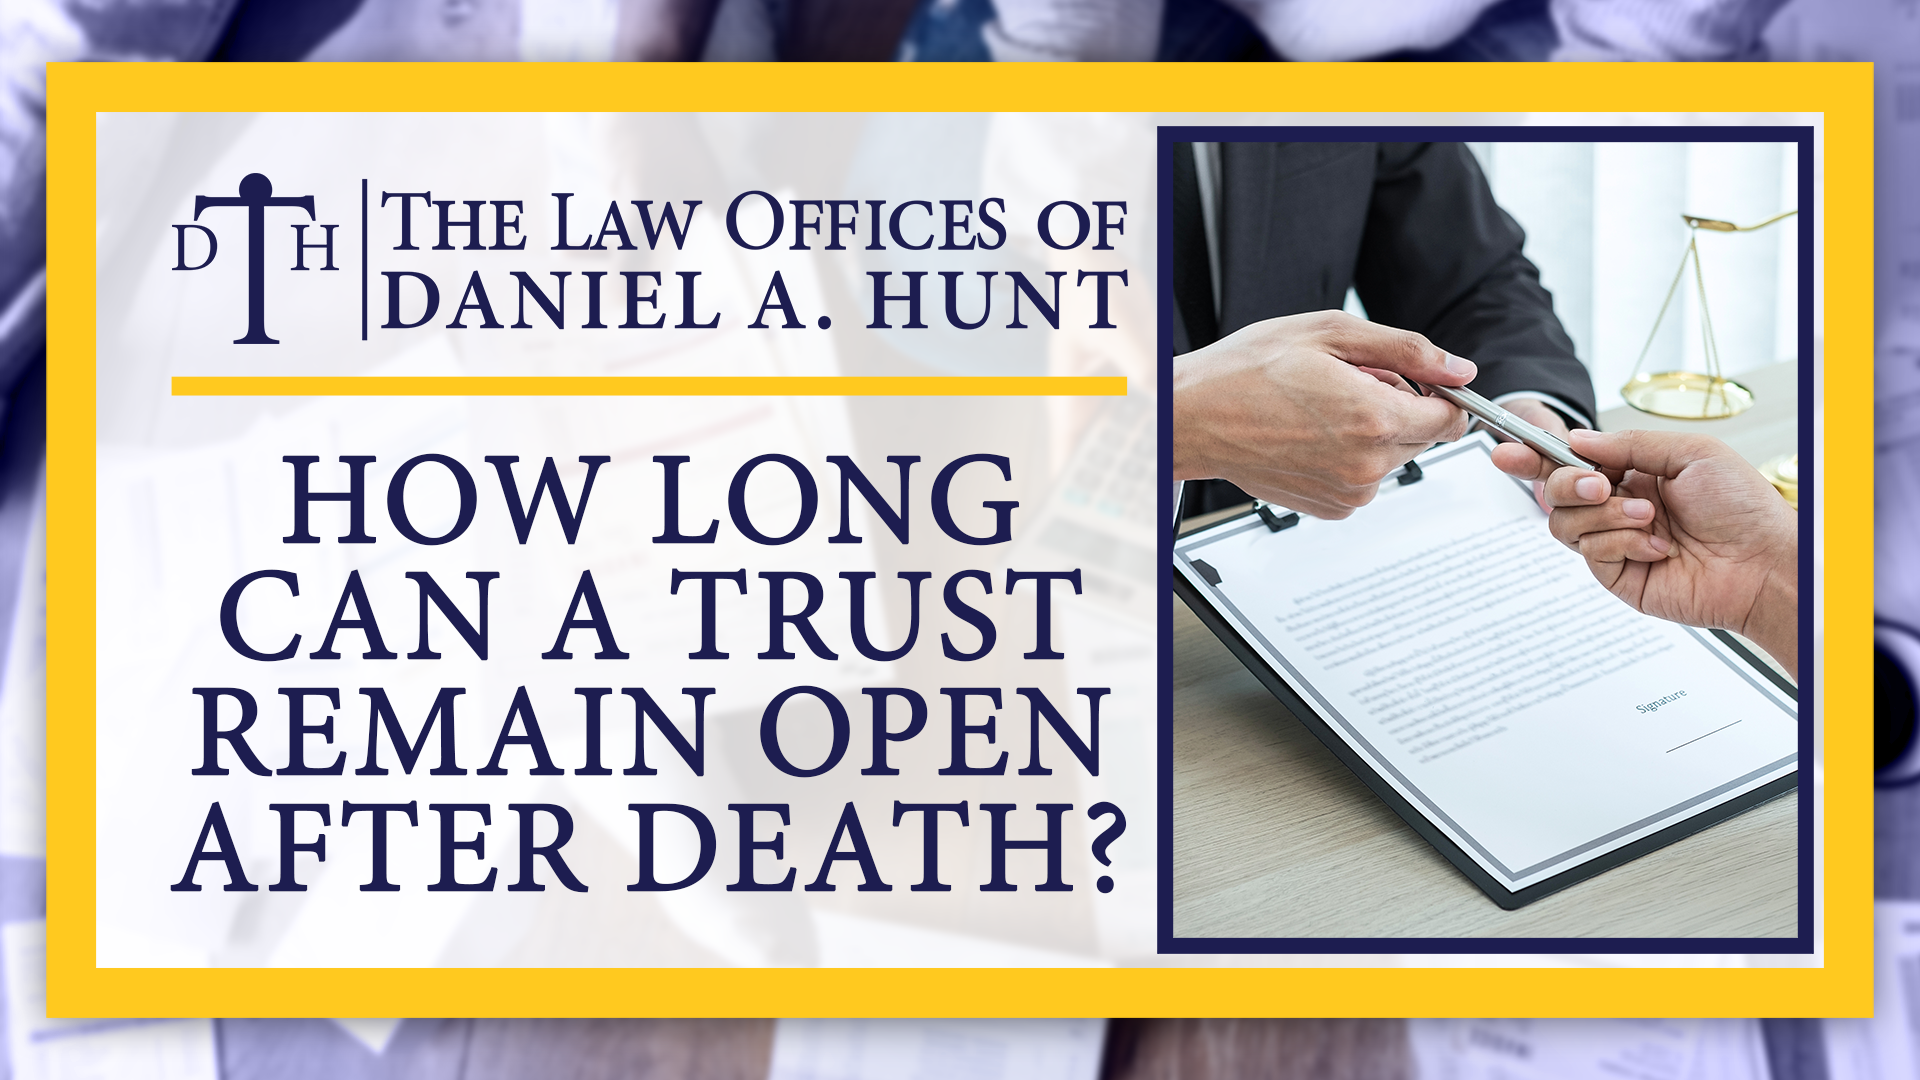 How-Long-Can-a-Trust-Remain-Open-After-Death-2